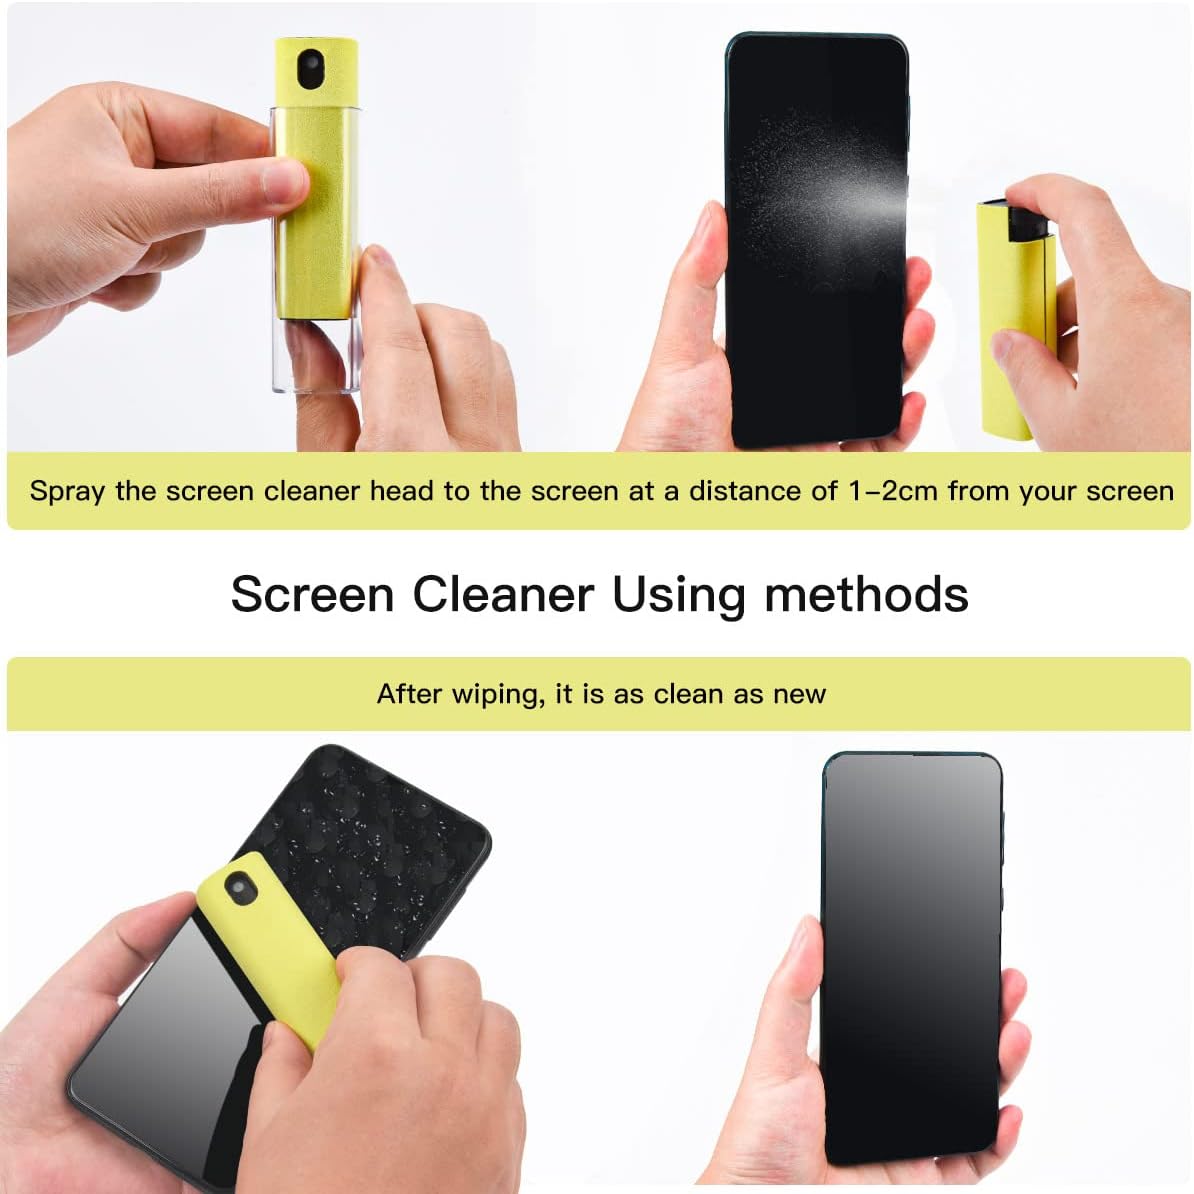 3PACK Screen Cleaner Spray Kit - Phone Cleaner, Computer Screen Cleaner, TV Screen Cleaner, All-in-One Portable Screen Cleaner for Laptop, Phone, iPAD, Tablet, MacBook, Touchscreen Mist Cleaner